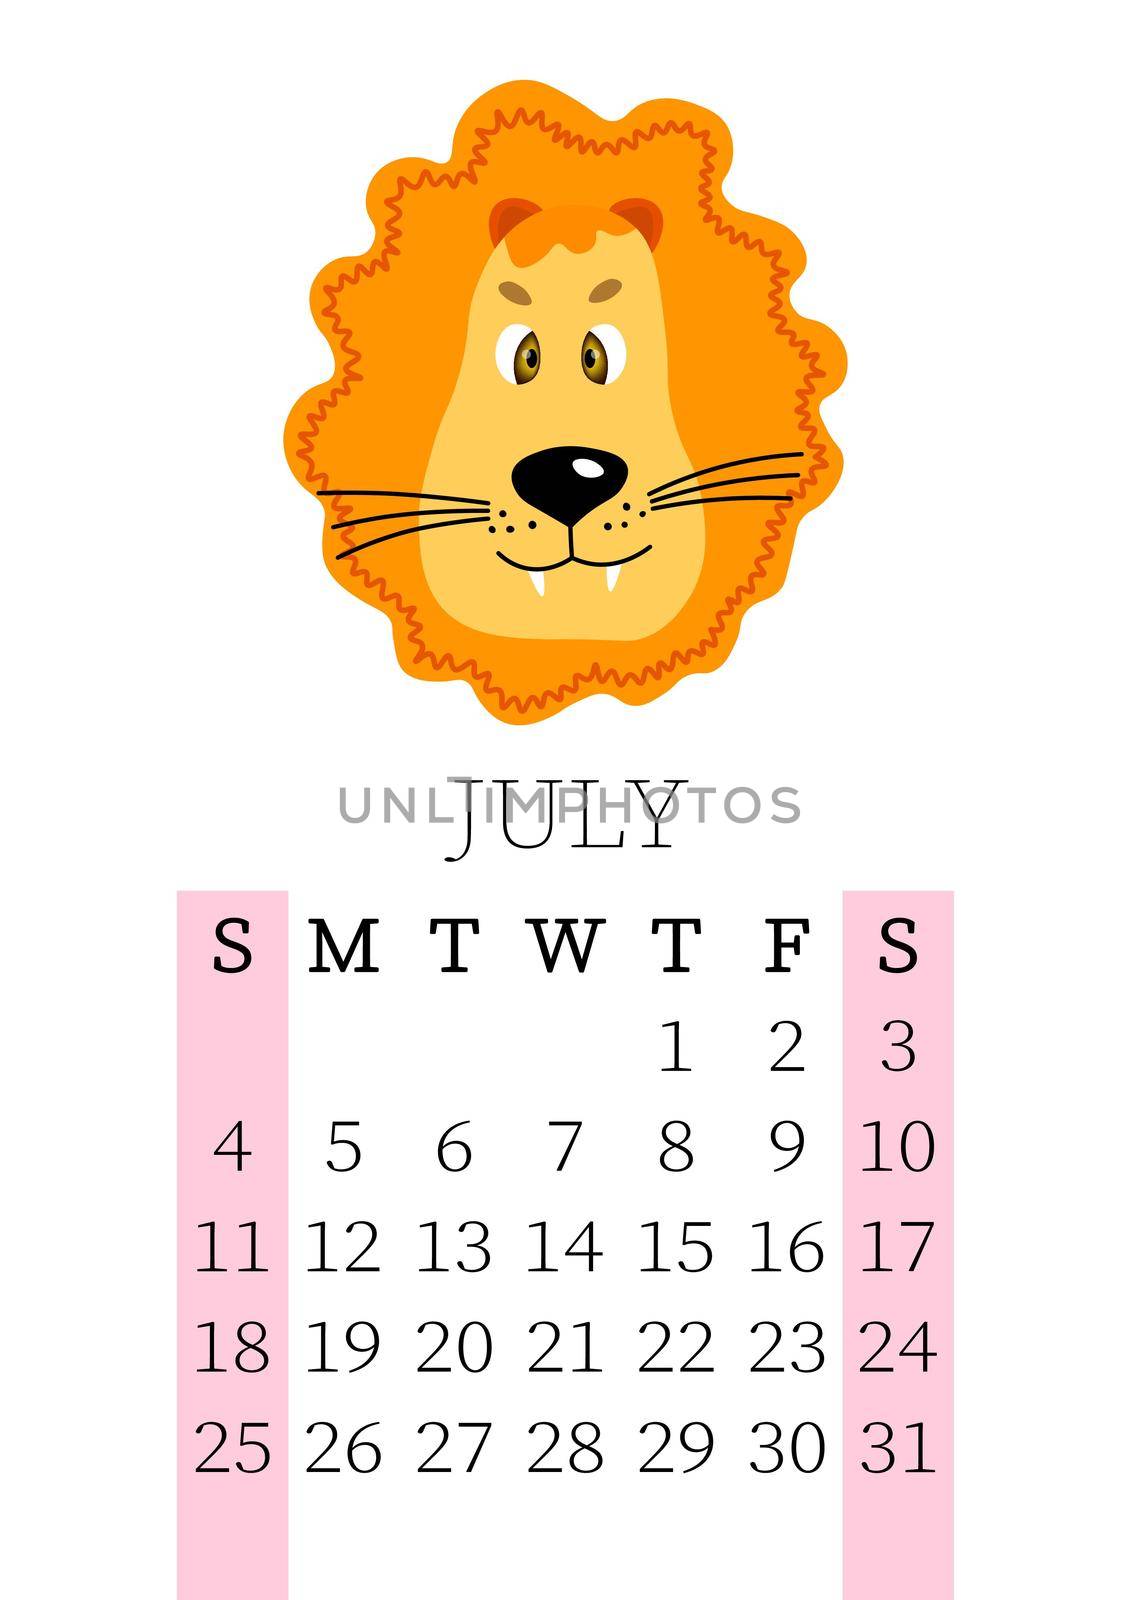 Calendar 2021. Monthly calendar for July 2021 from Sunday to Saturday. Yearly Planner. Templates with cute hand drawn face animals. Vector illustration. Great for kids. Calendar page for print.